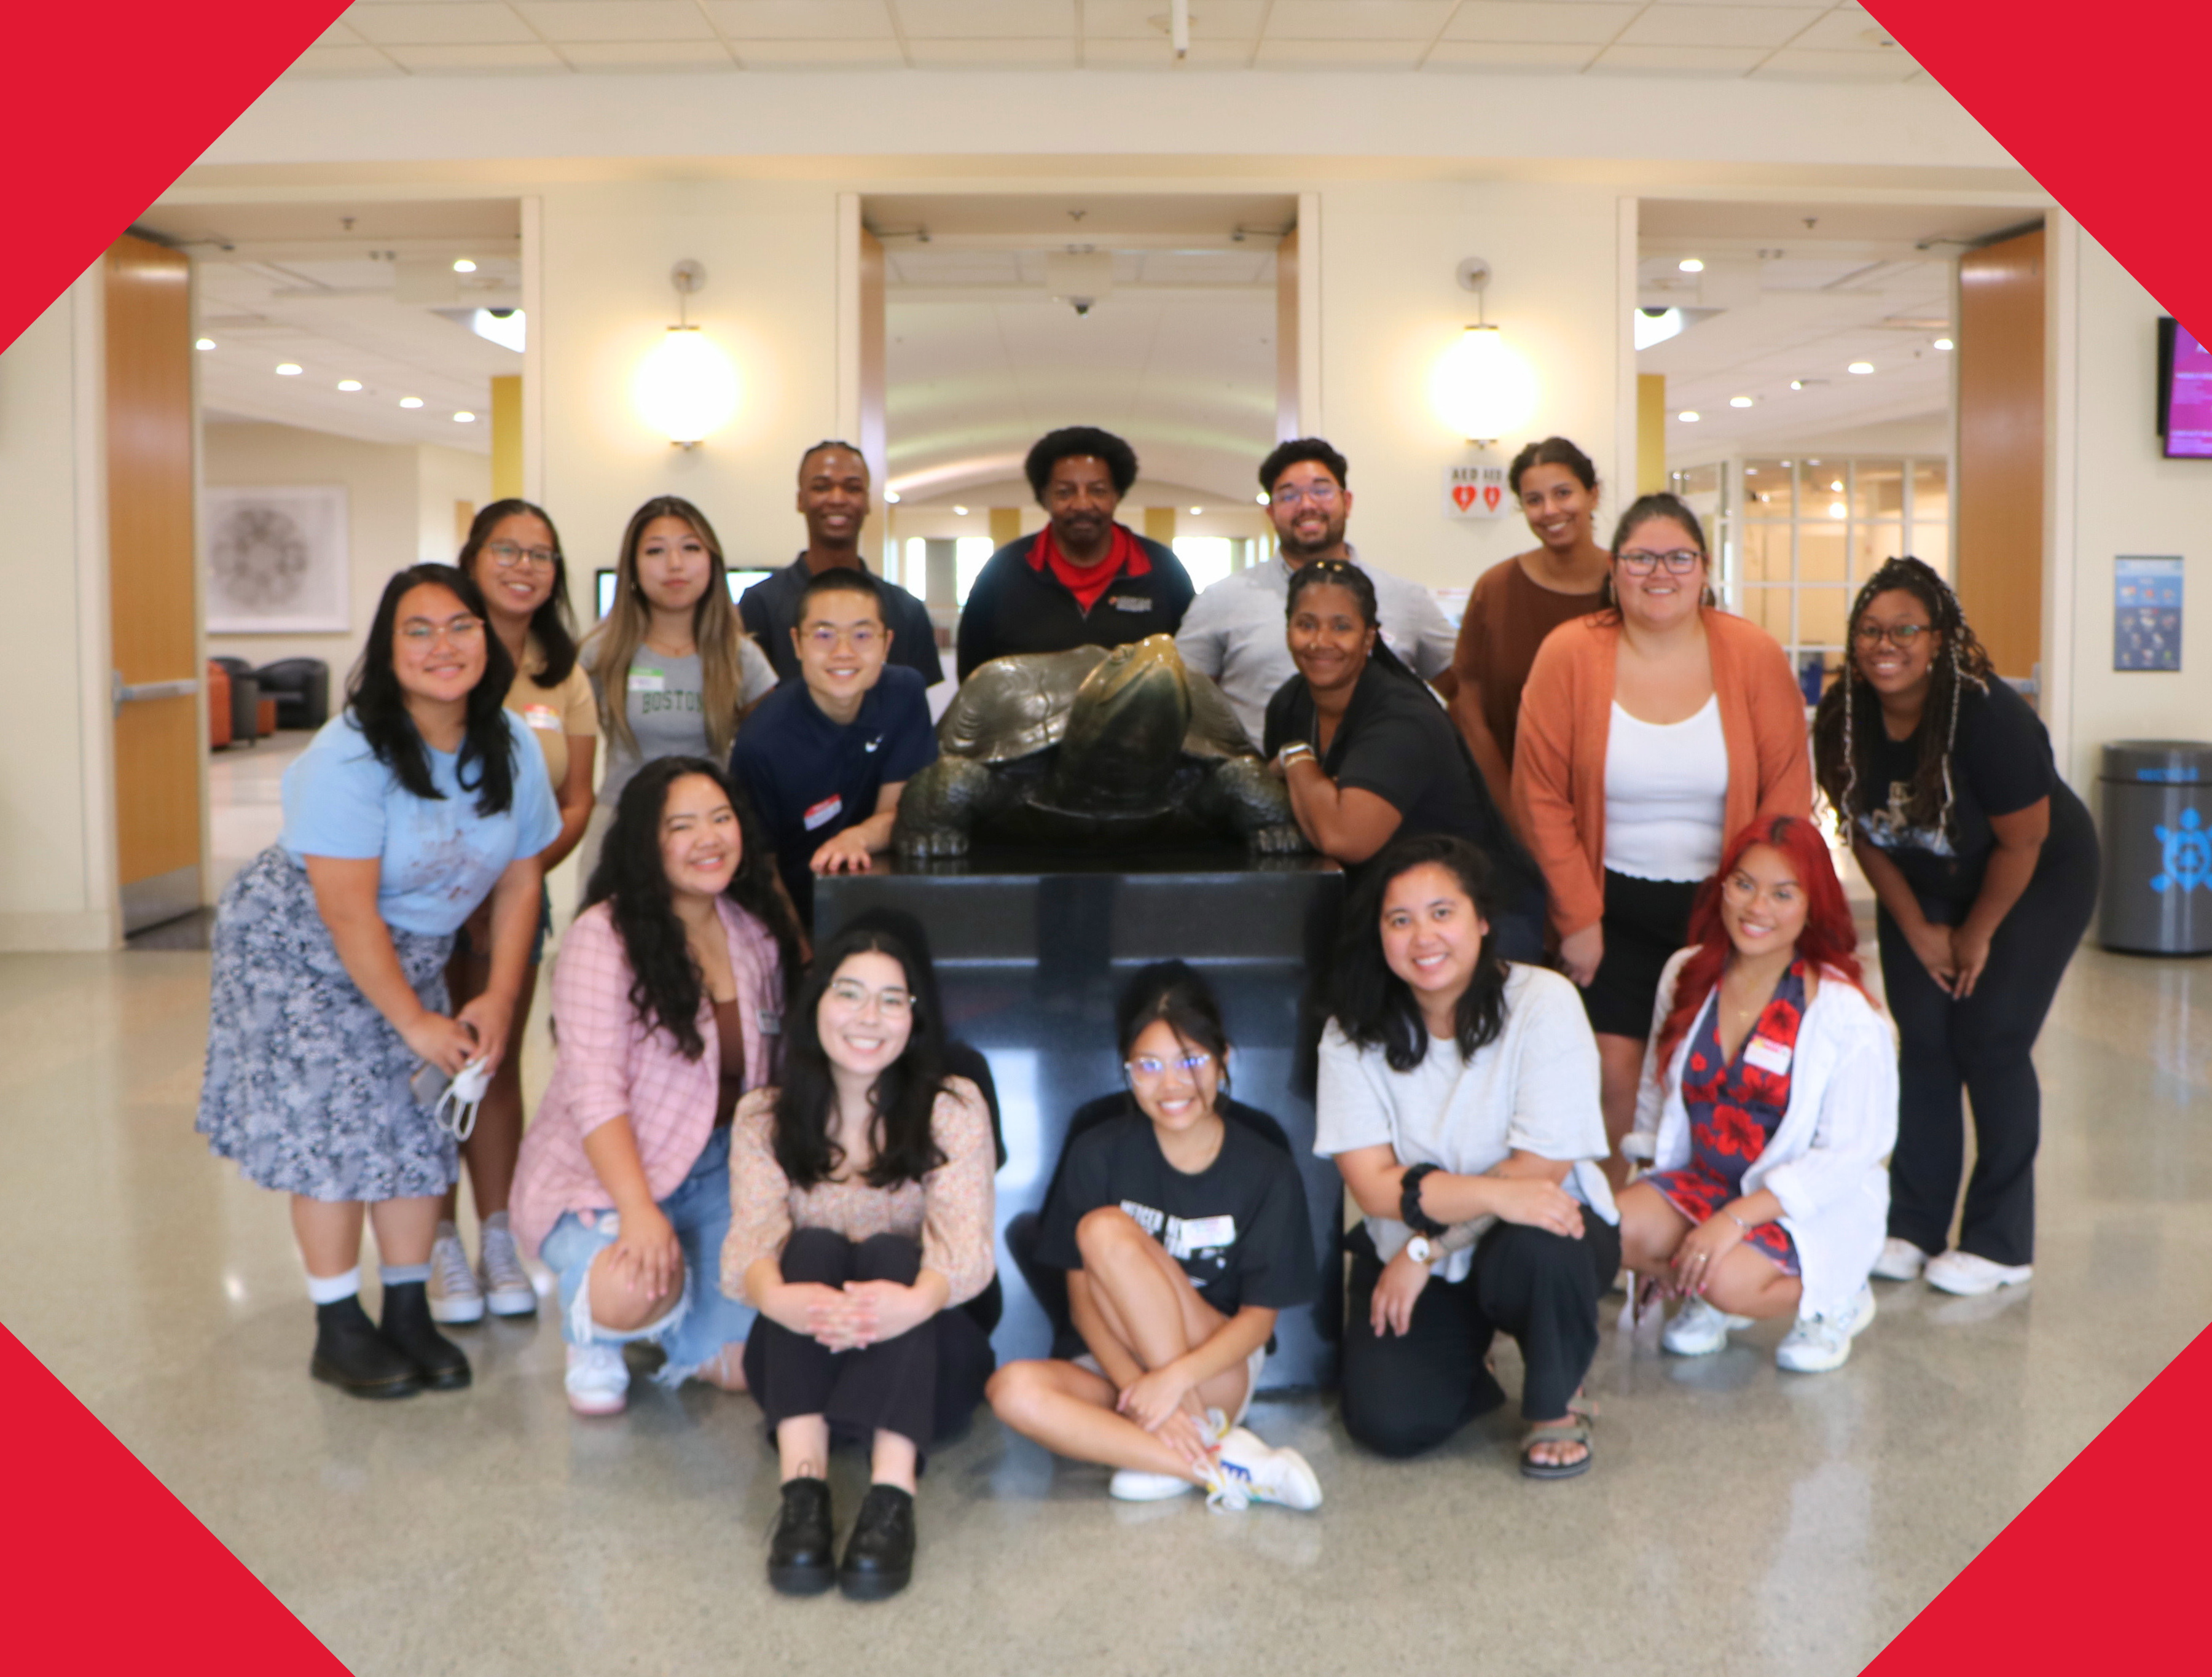 Group photo of all 15 members of the MICA staff, smiling around the Stamp Testudo statue.